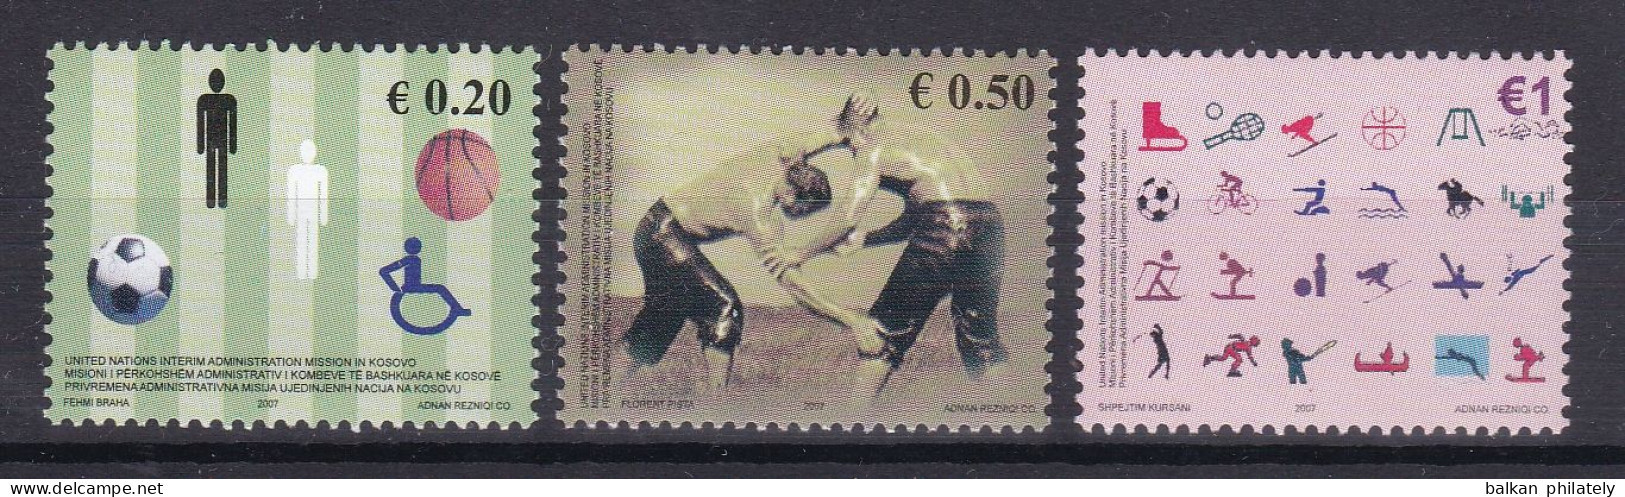 Kosovo 2007 Sports Basketball Football Disabled Persons Wrestling Tennis Cycling Equestrian UNMIK UN United Nations MNH - Neufs